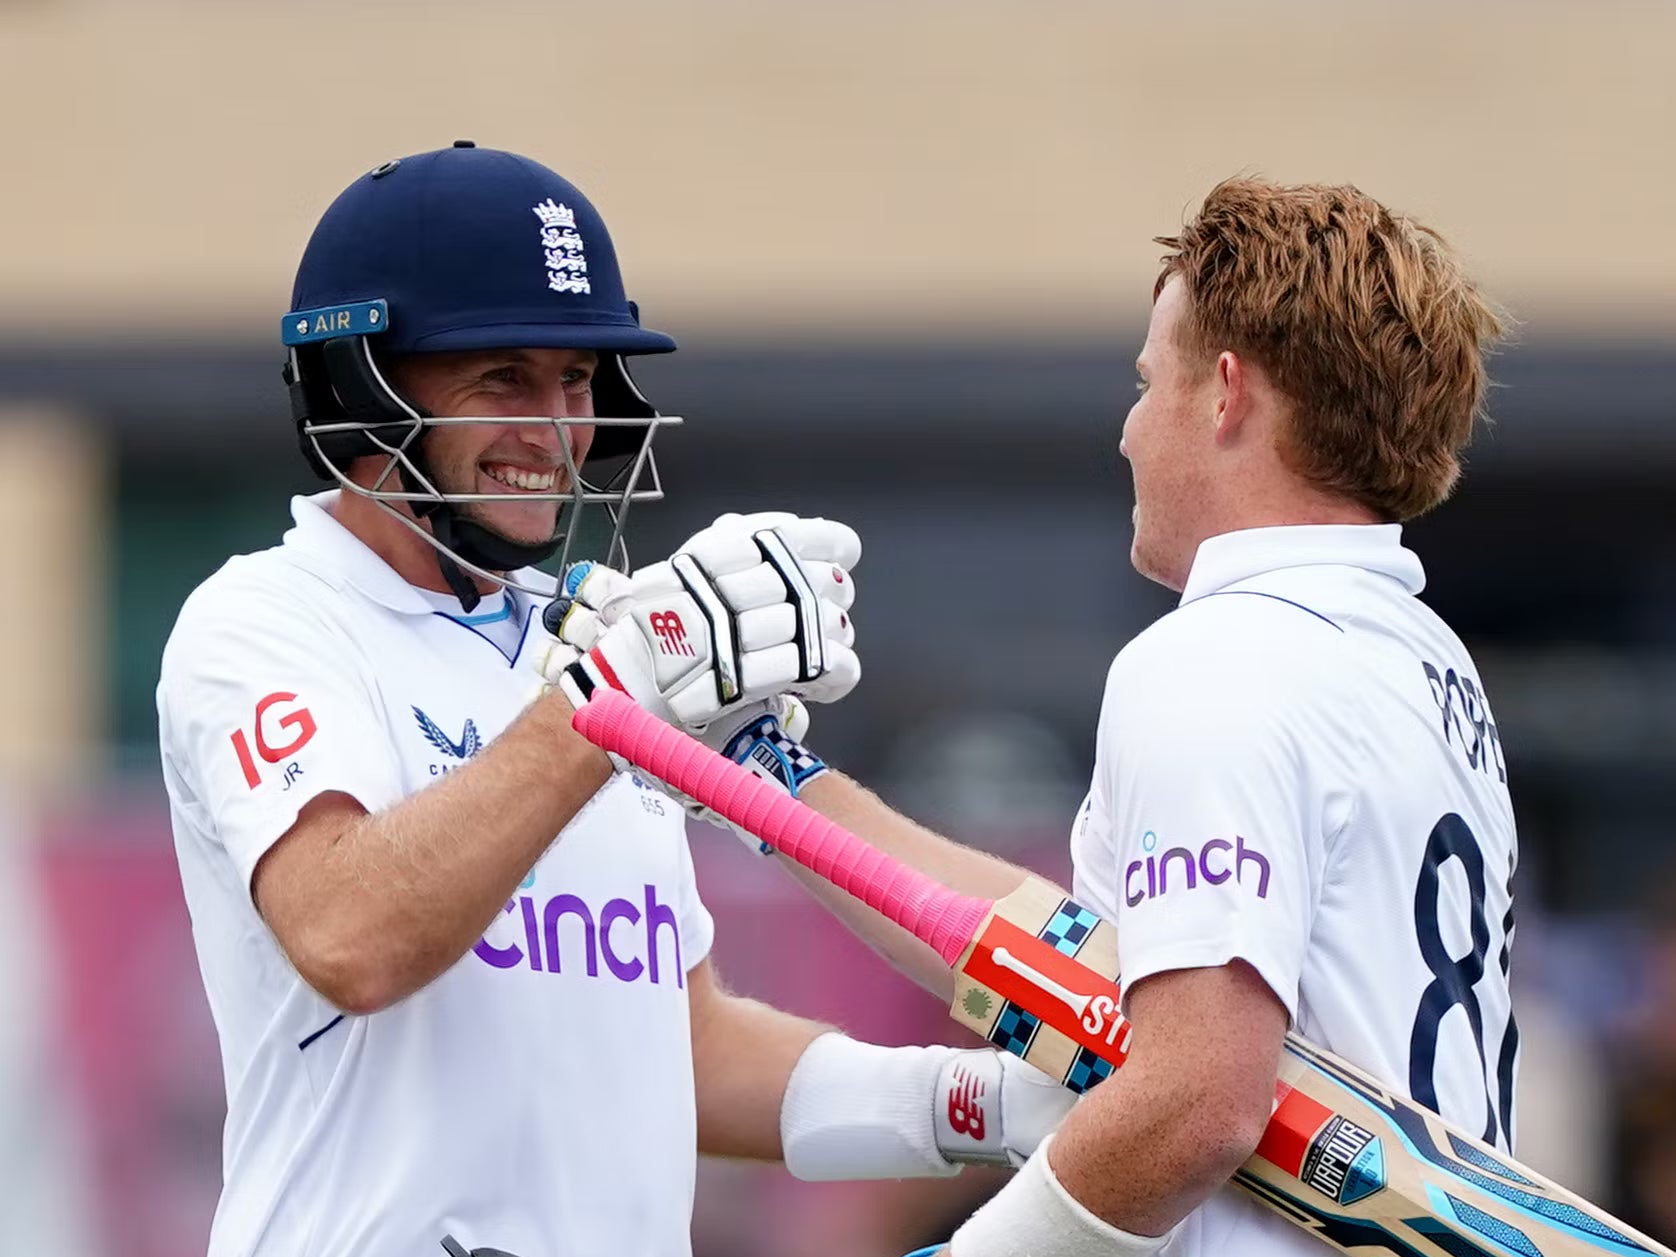 Centuries by Root, left, and Pope give England hope in this second Test